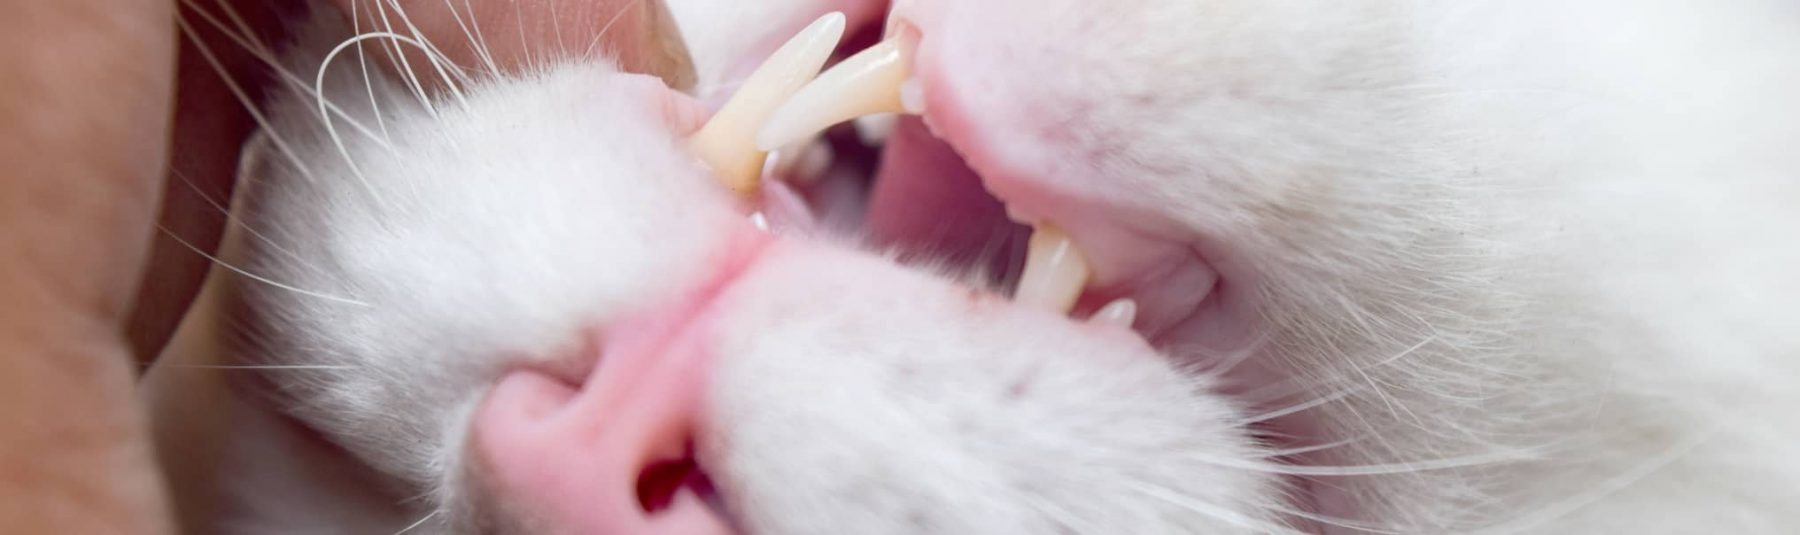 Dental Care Services for Cats